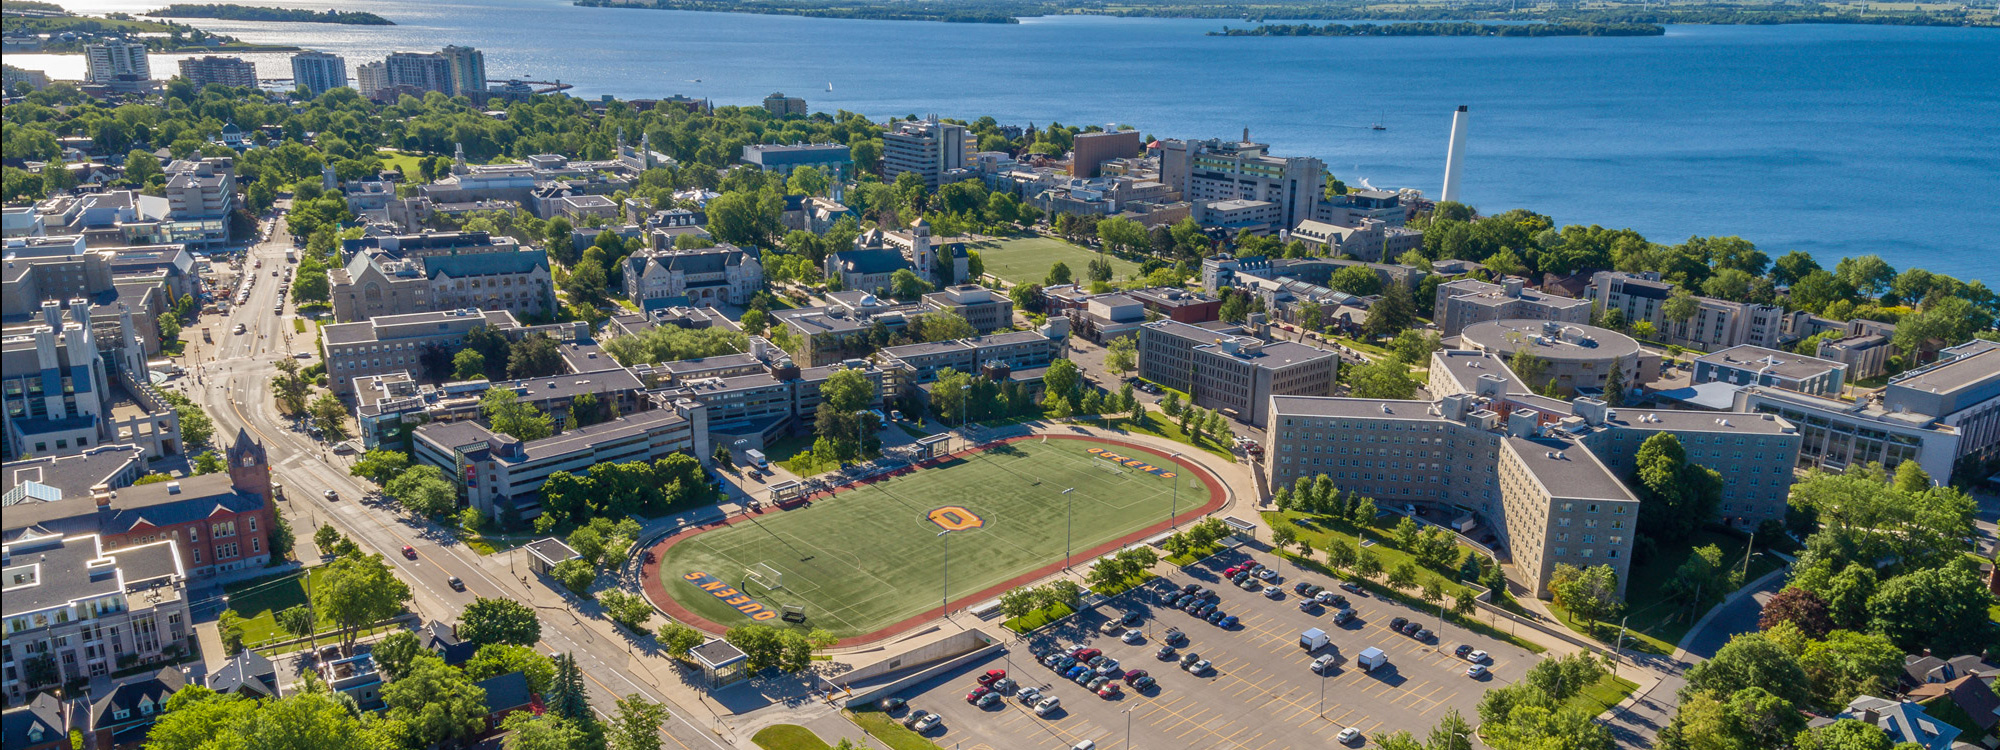 Queen's University campus looking south